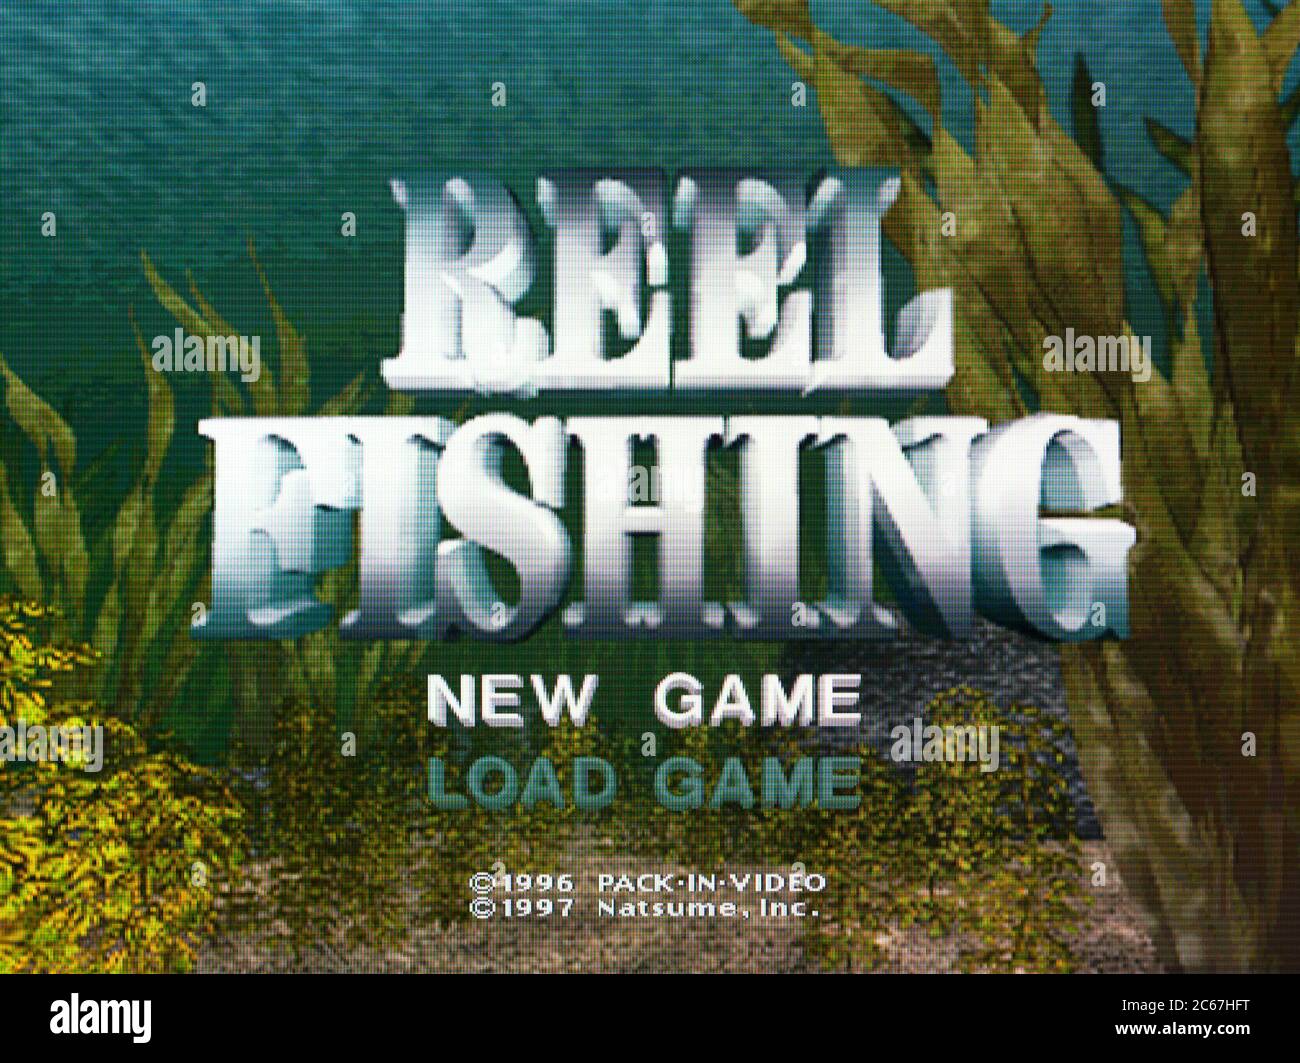 https://c8.alamy.com/comp/2C67HFT/reel-fishing-sony-playstation-1-ps1-psx-editorial-use-only-2C67HFT.jpg